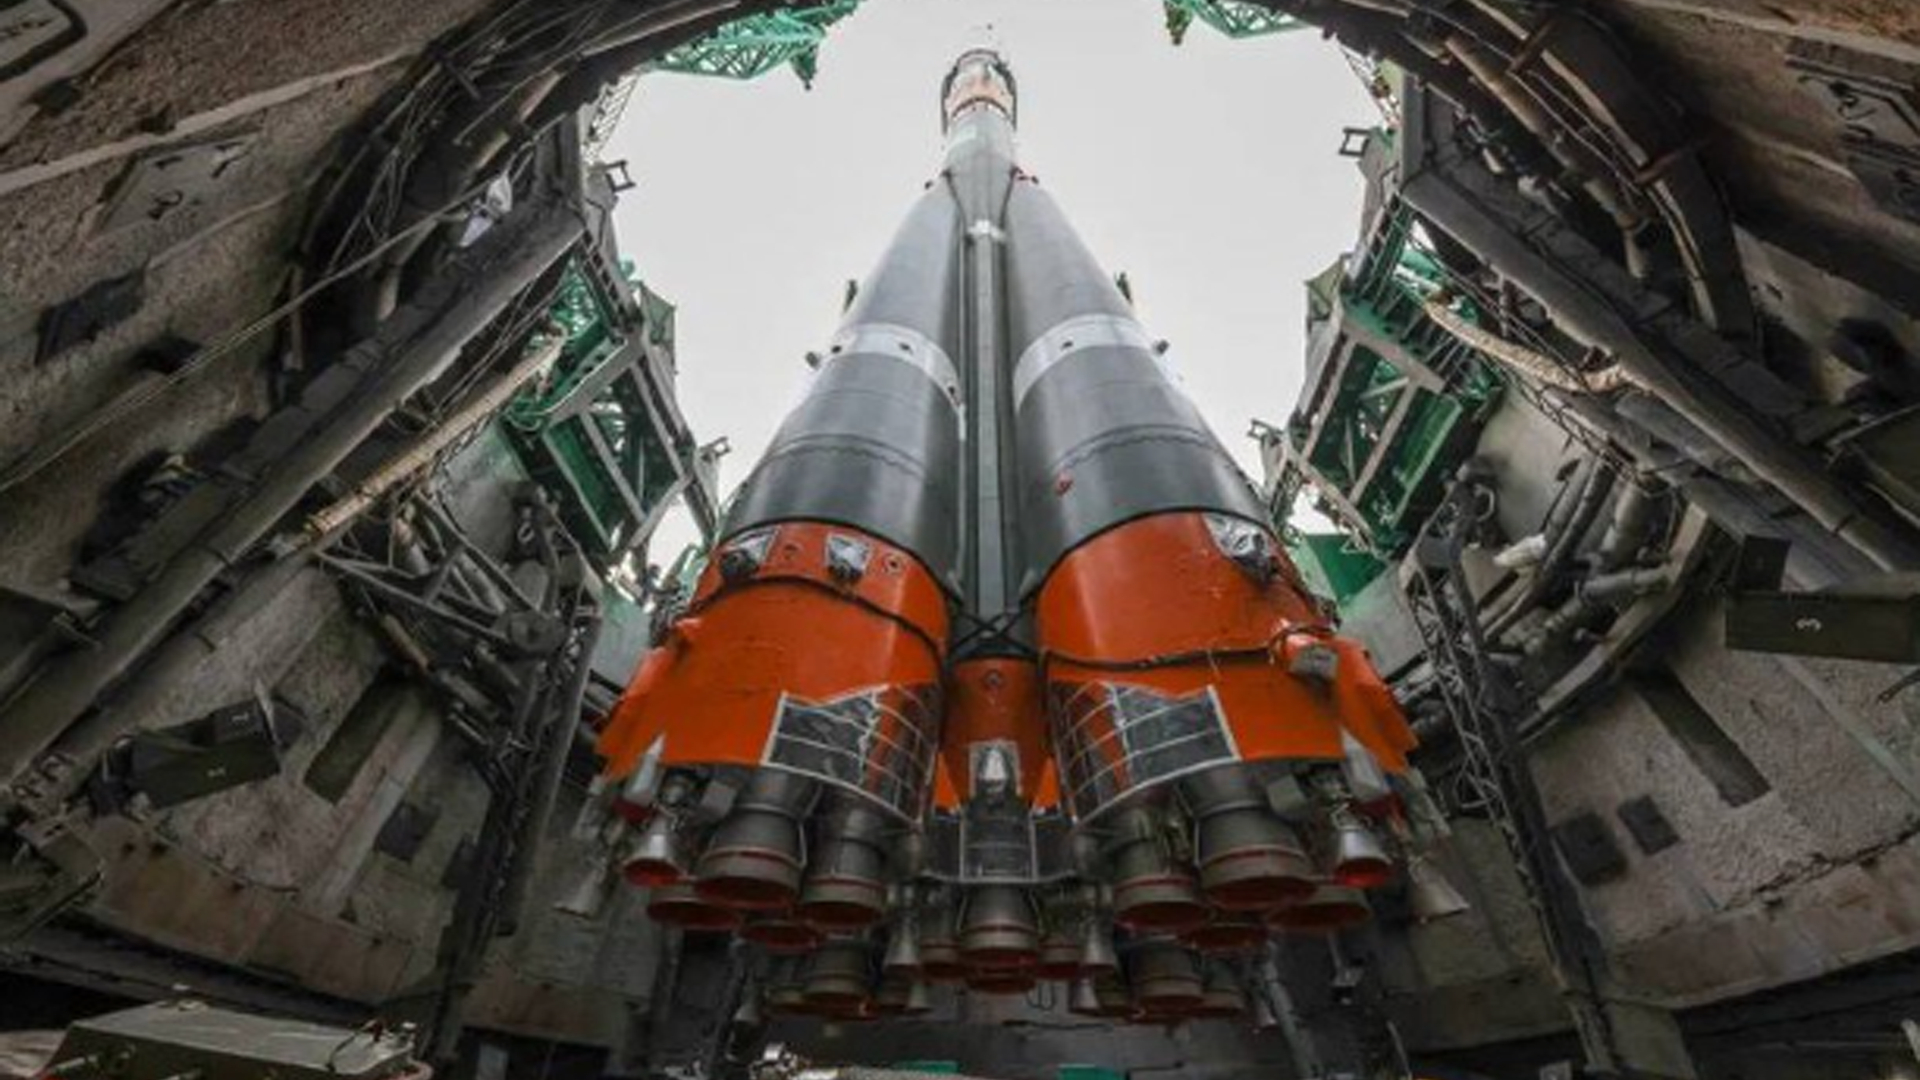 A Russian Soyuz rocket carrying the Soyuz MS-23 crew capsule atop its launch pad at Baikonur Cosmondrome in Kazakhstan for a Feb. 23, 2023 launch.